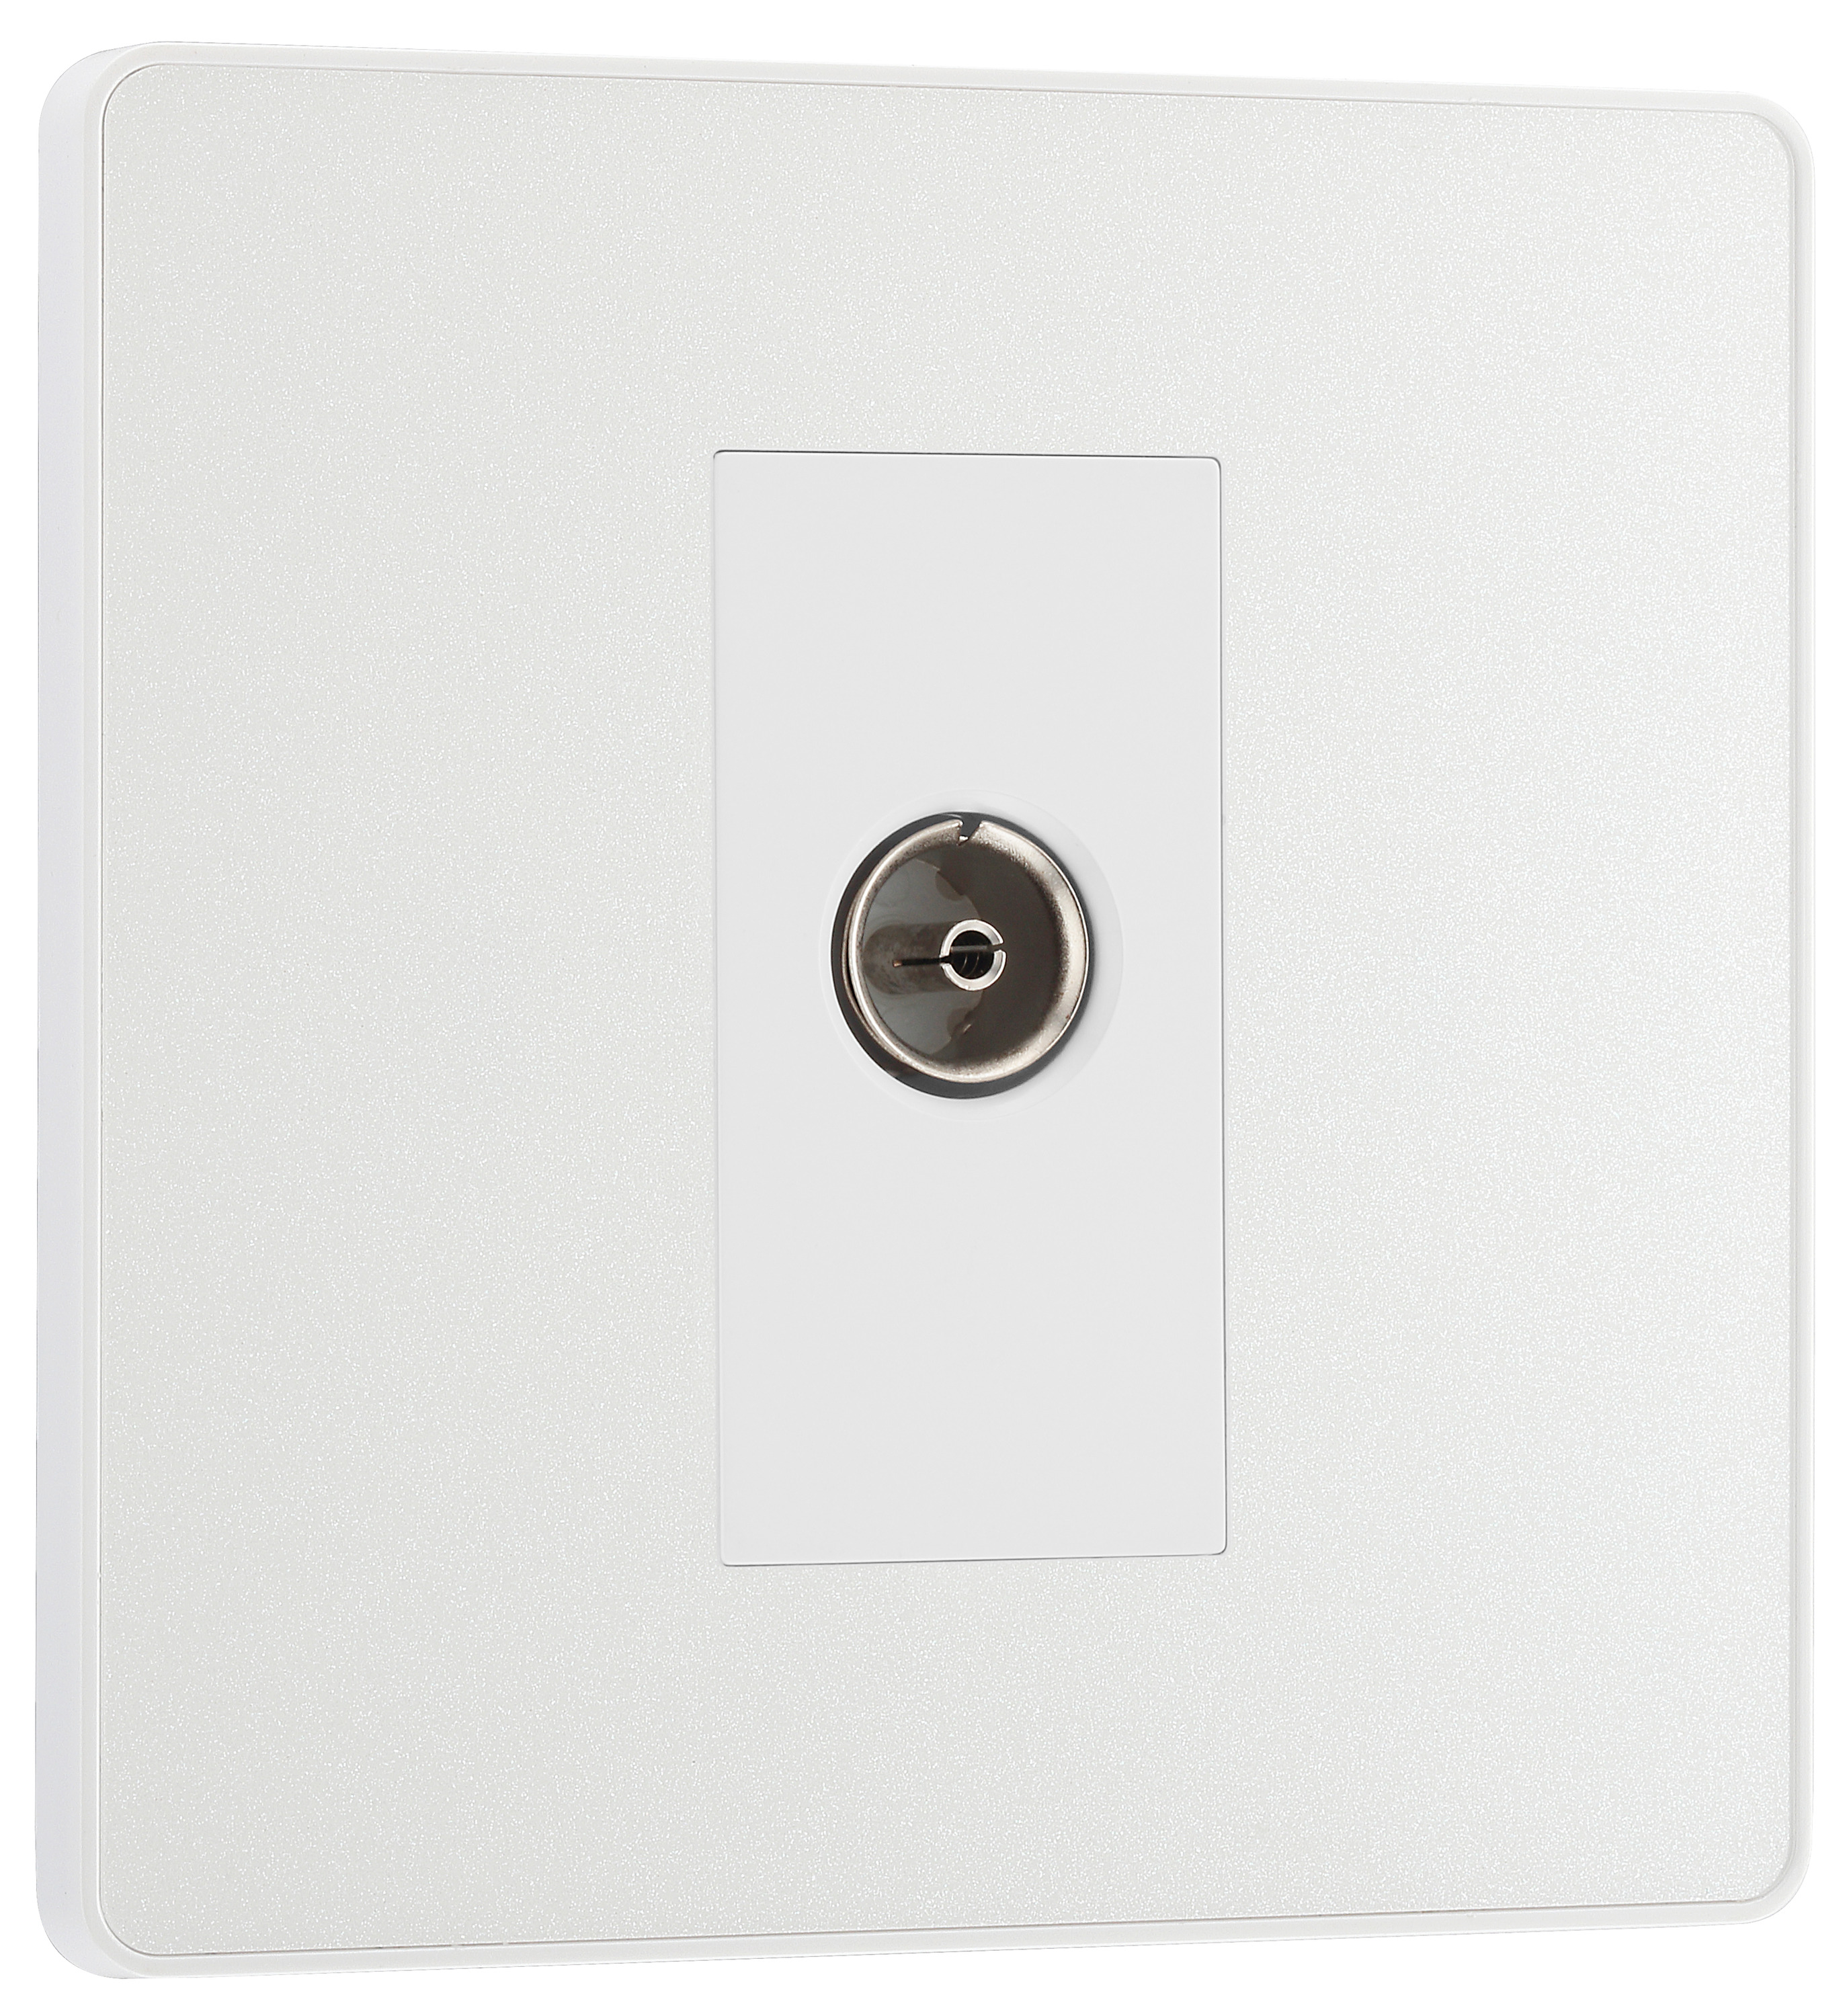 BG Evolve Pearlescent White Single Socket for Tv or Fm Co-Axial Aerial Connection